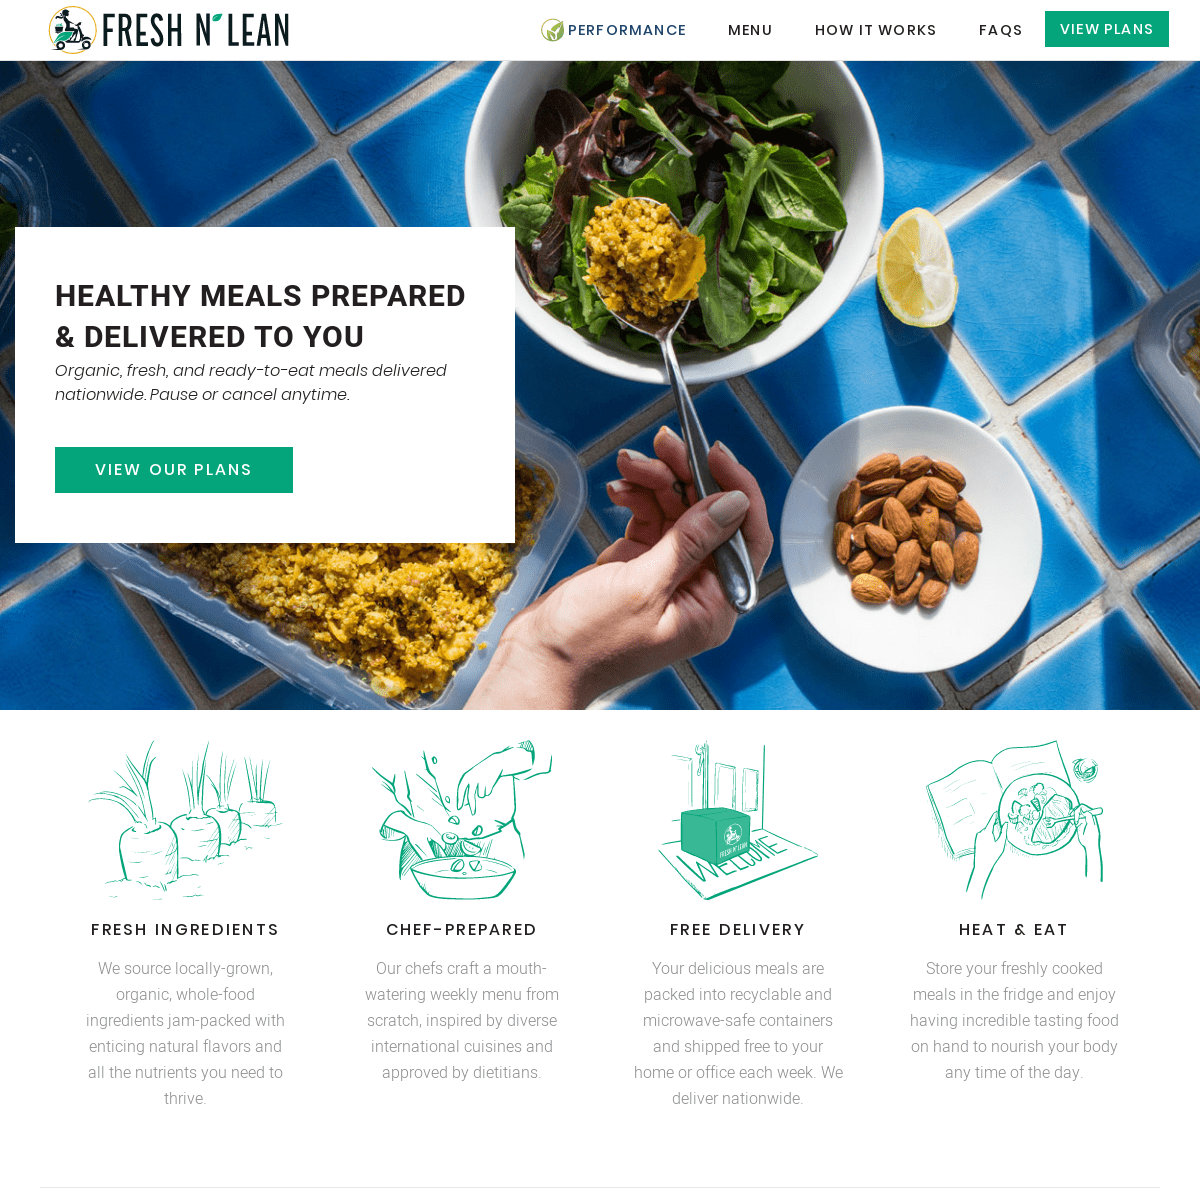 Meal Prep Delivery Service: Prepared Fresh, Ready-to-Eat | Fresh n' Lean